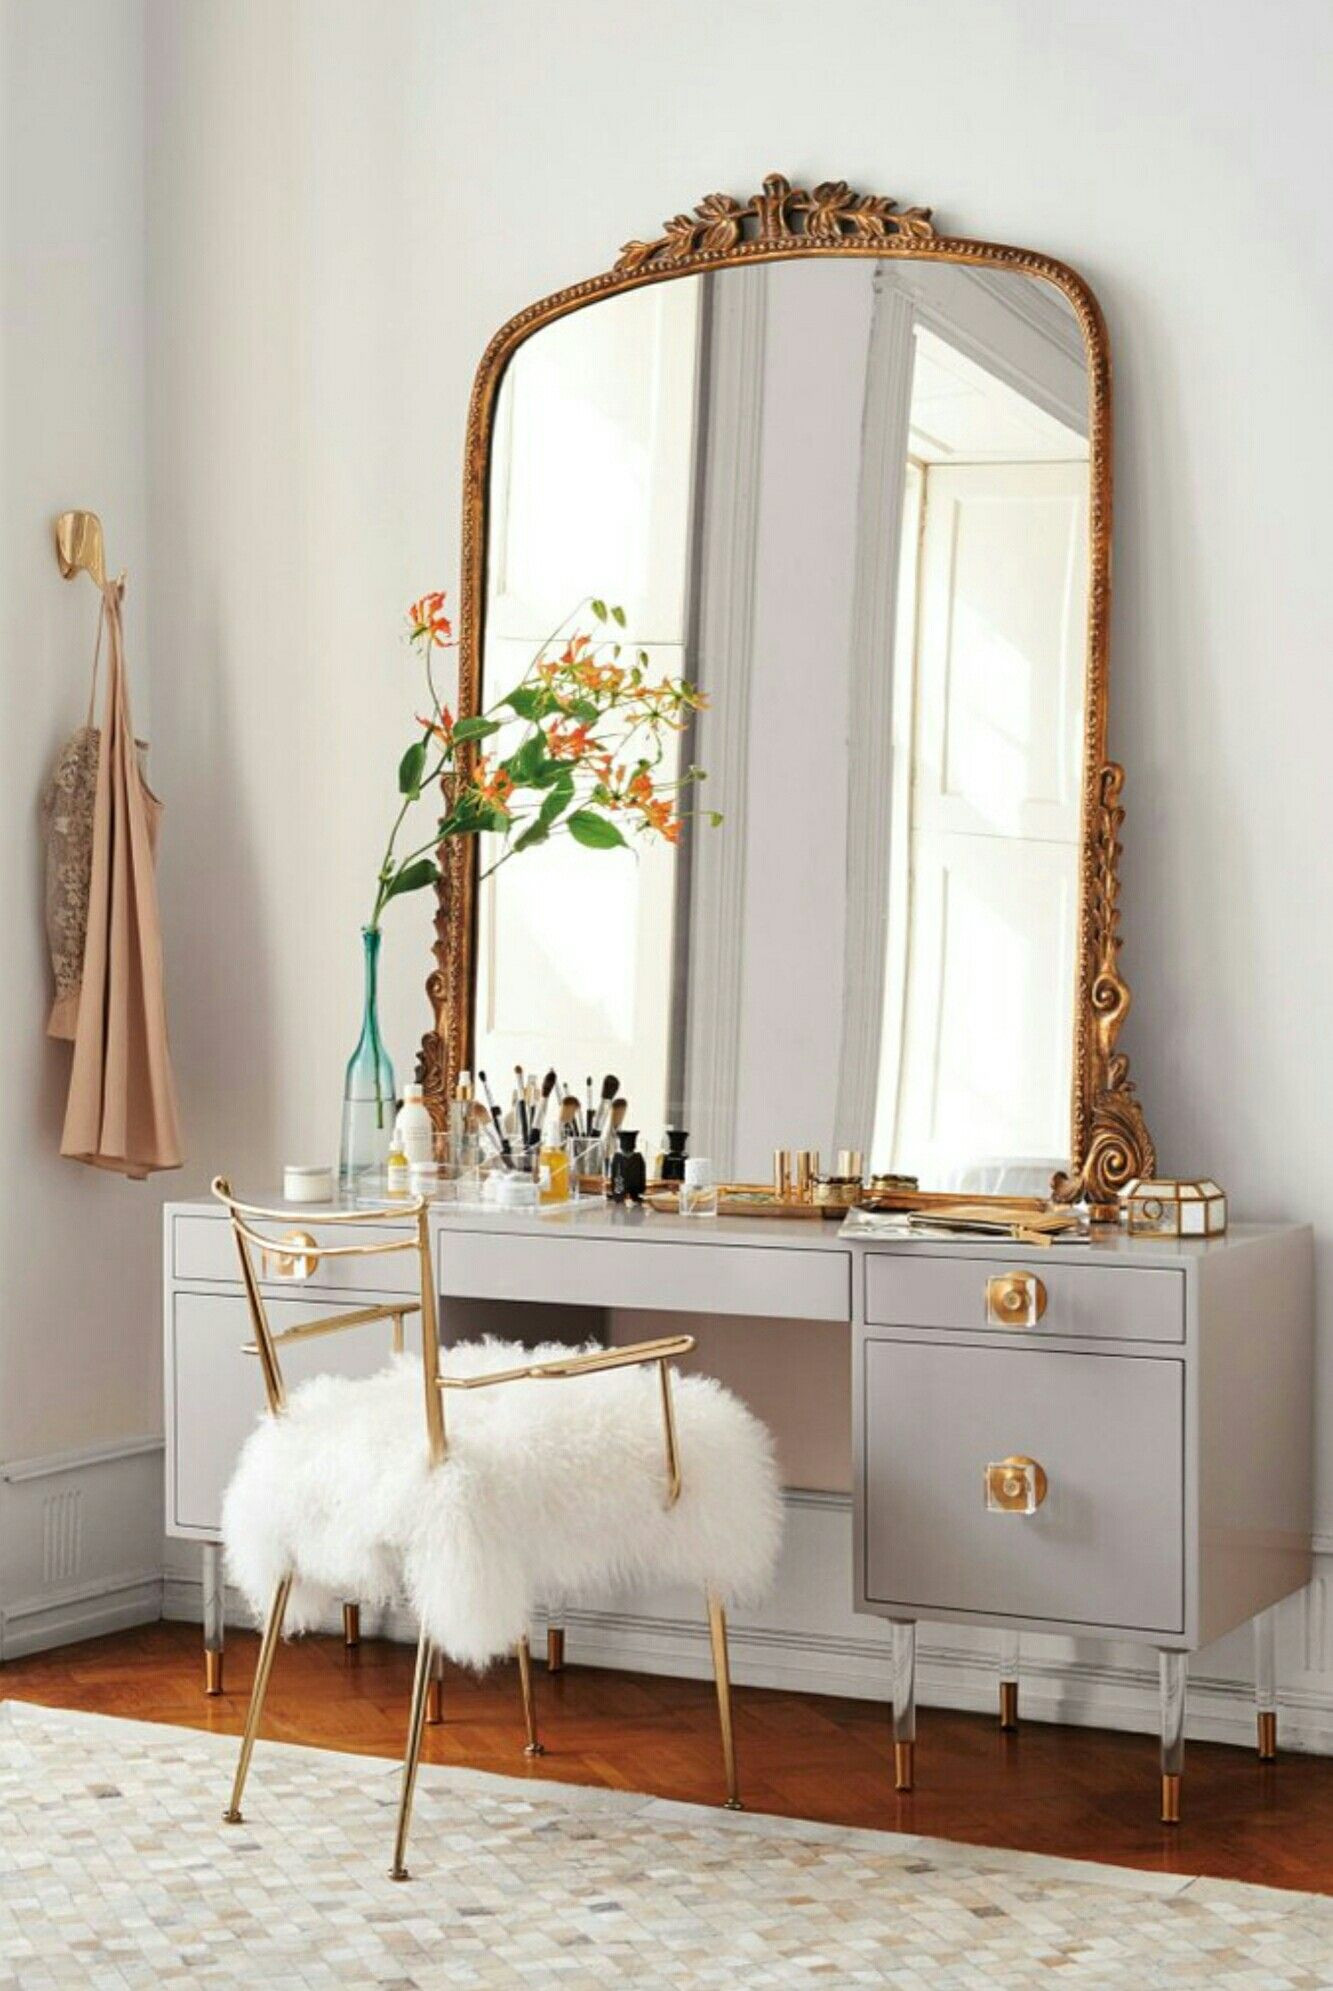 23 Elegant Large Mirror Floor Vase 2024 free download large mirror floor vase of vanity french large mirror furry chair for the home pinterest in vanity french large mirror furry chair